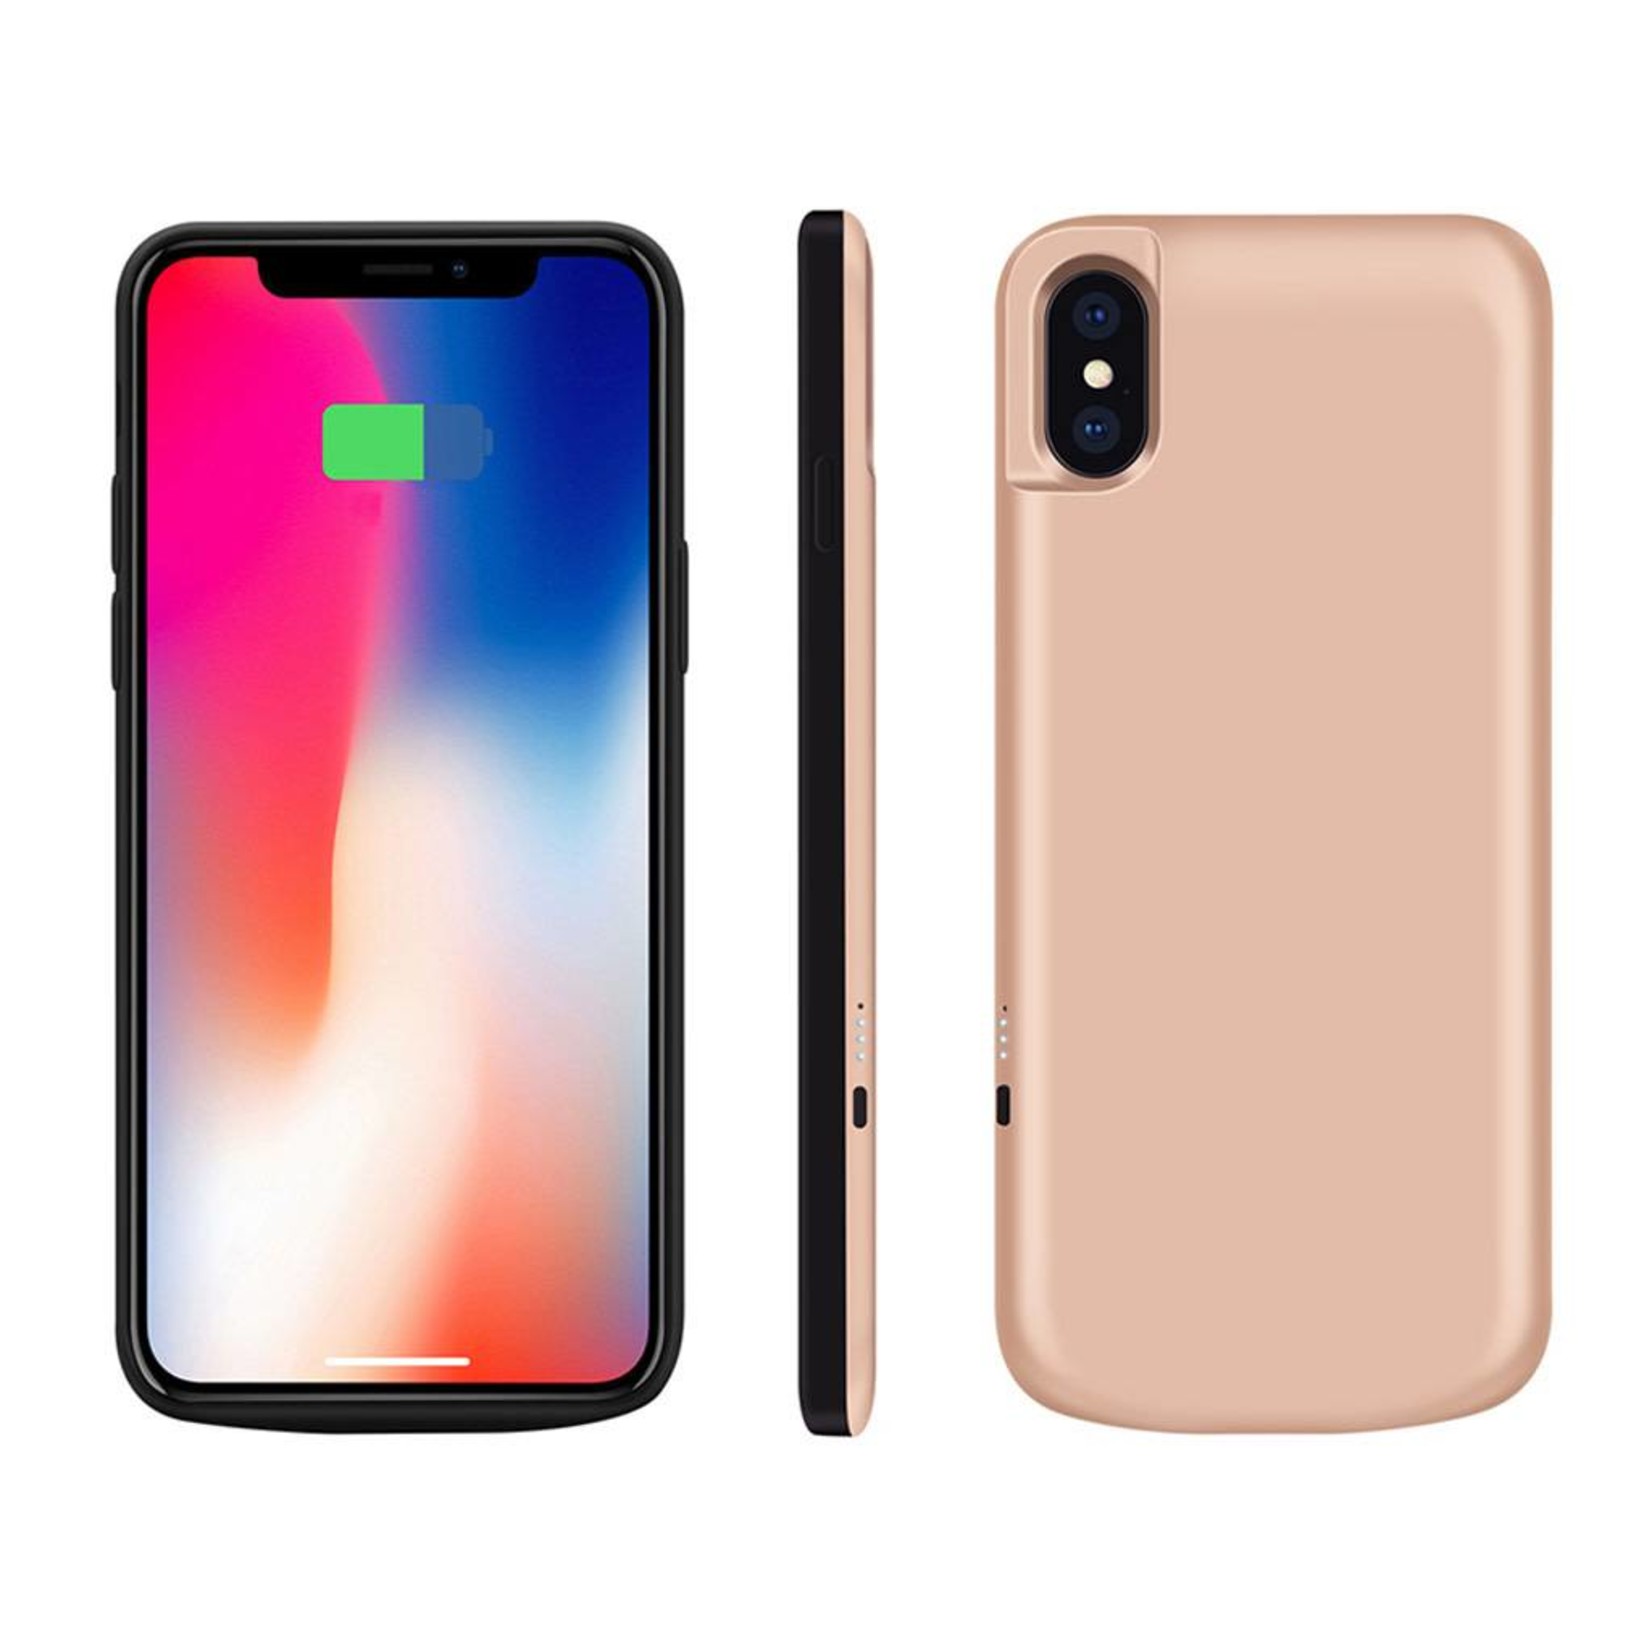 JLW Power Battery Case with Kickstand for iPhone X / XS (3,000mAh)